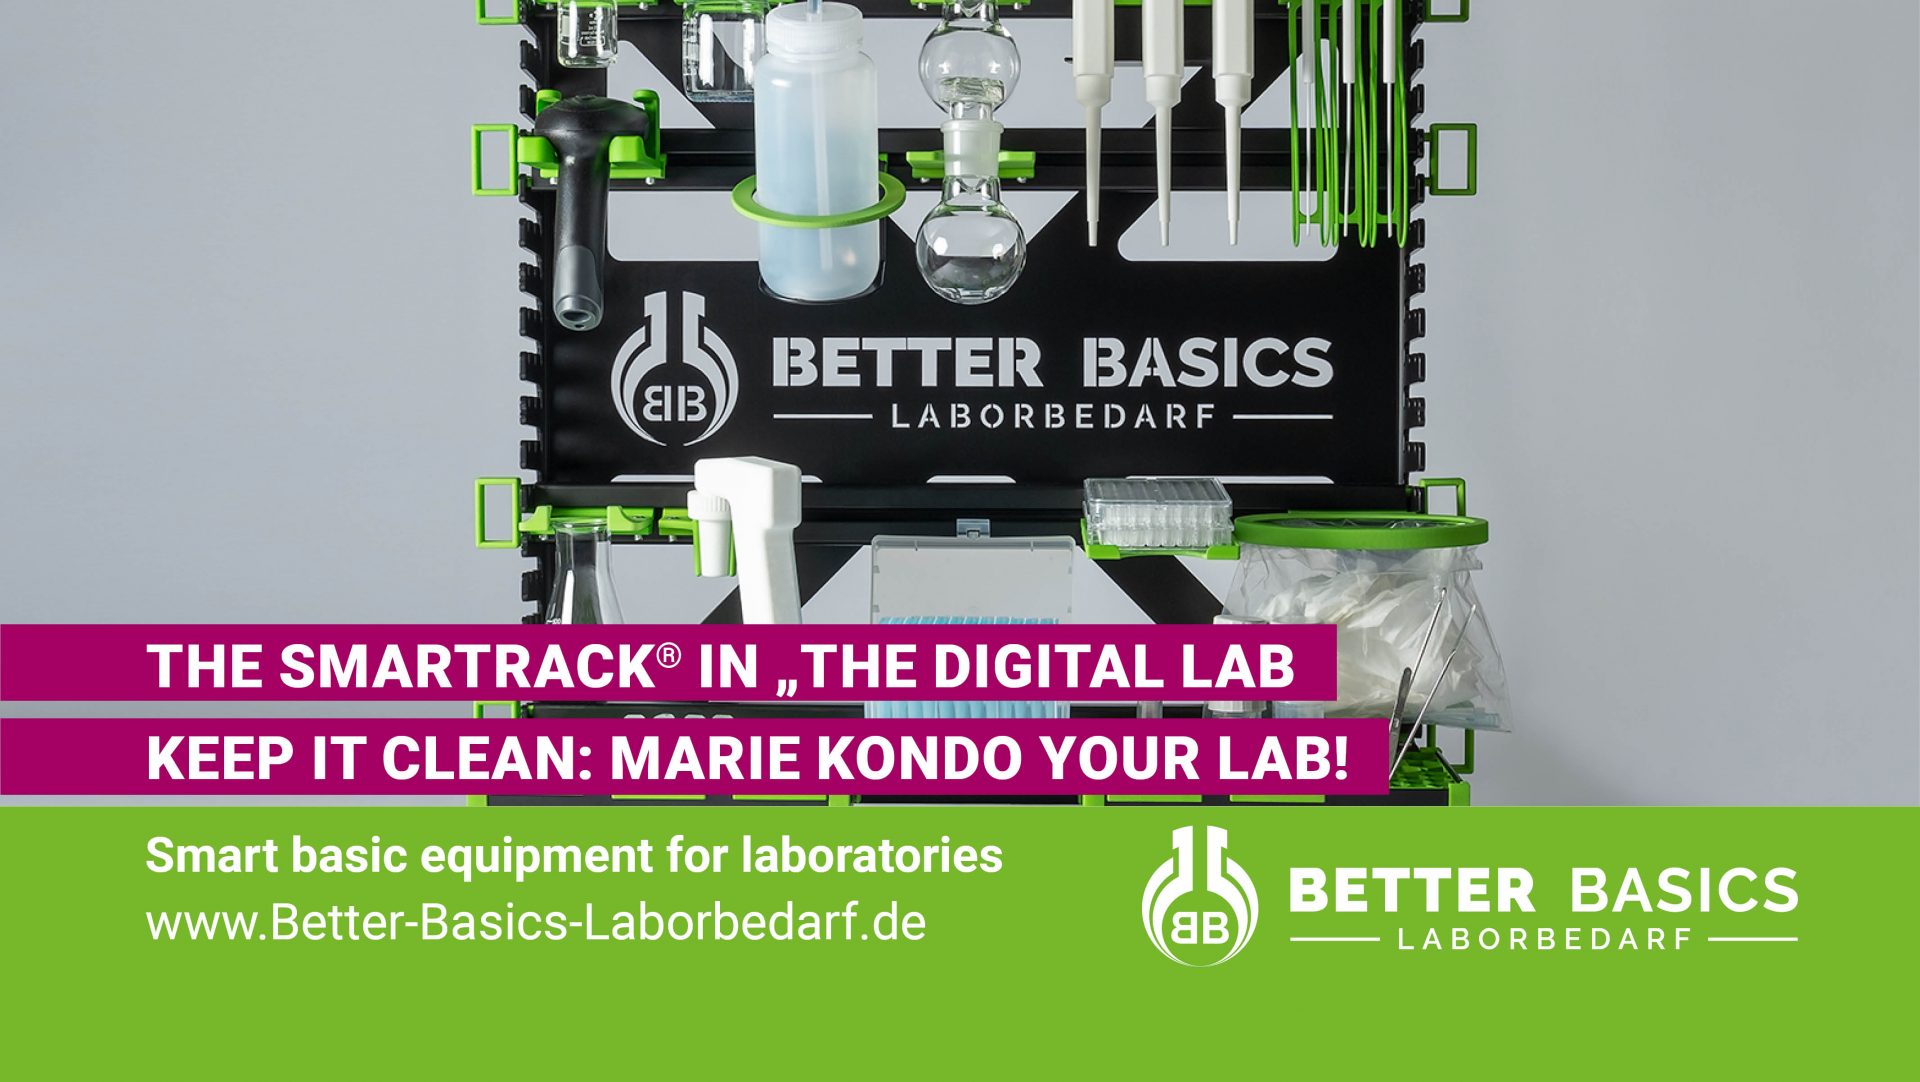 The SmartRack® in "THE DIGITAL LAB Keep it clean: Marie Kondo your lab!